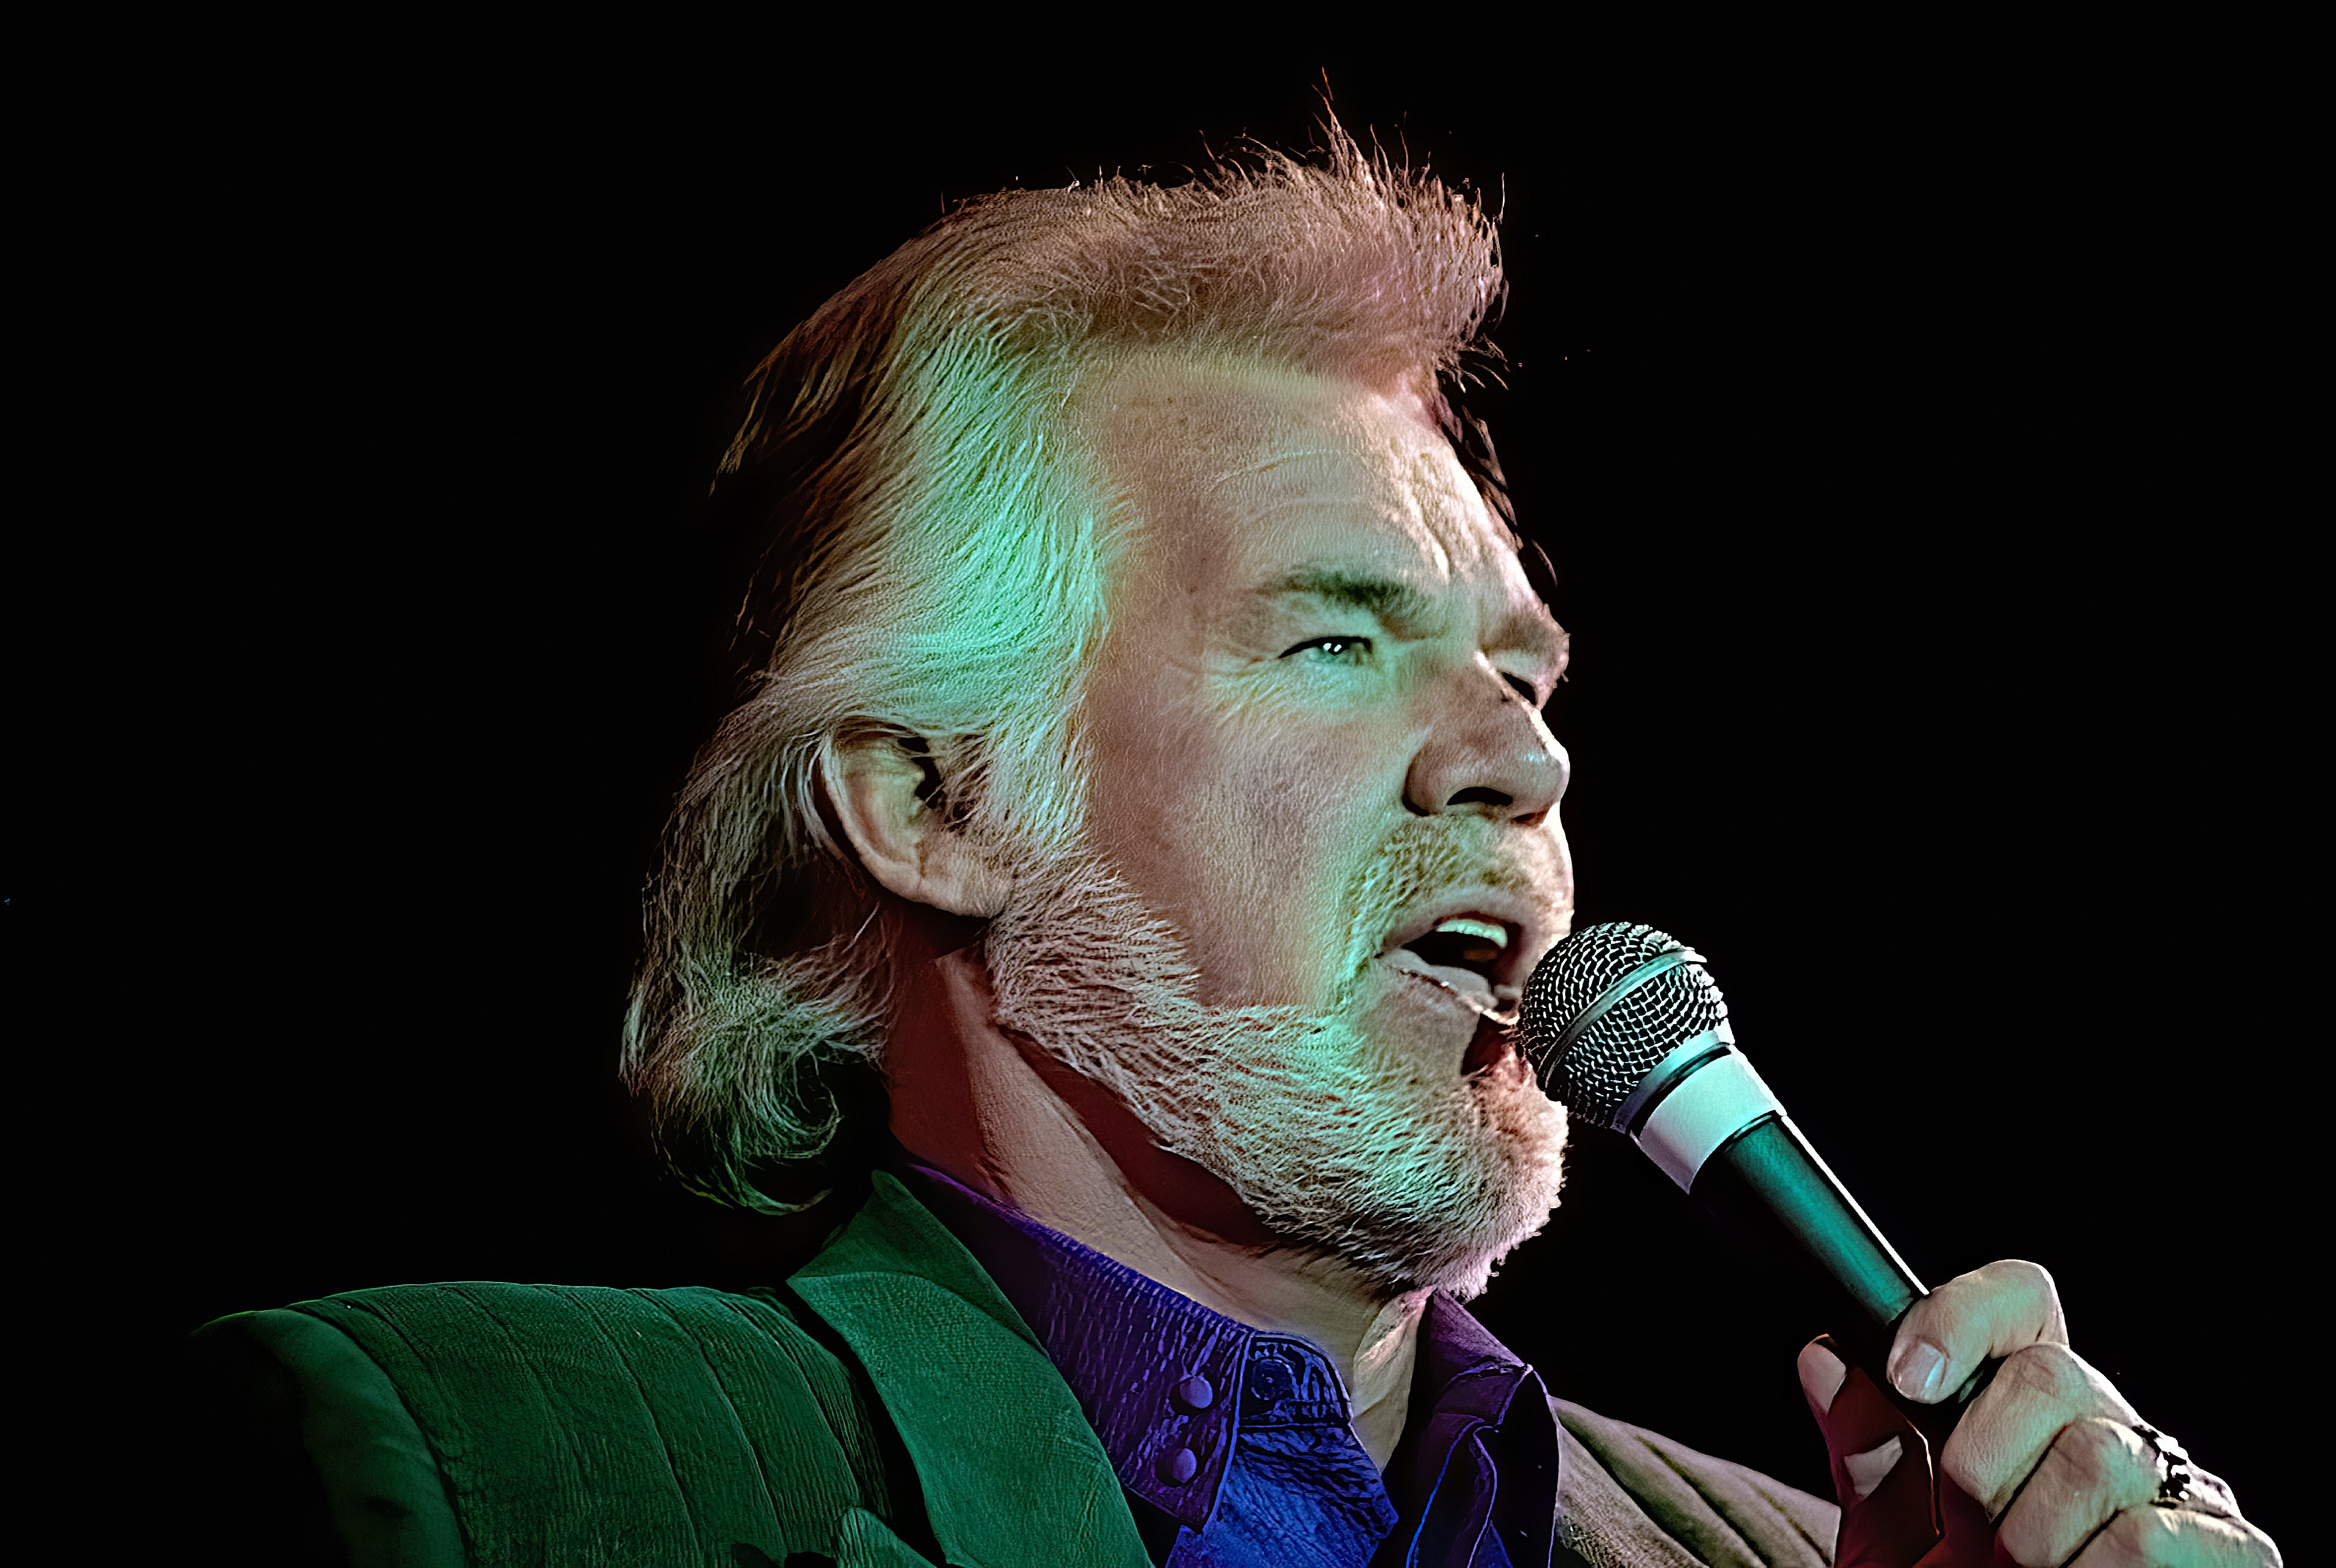 Kenny Rogers holds a microphone while singing.